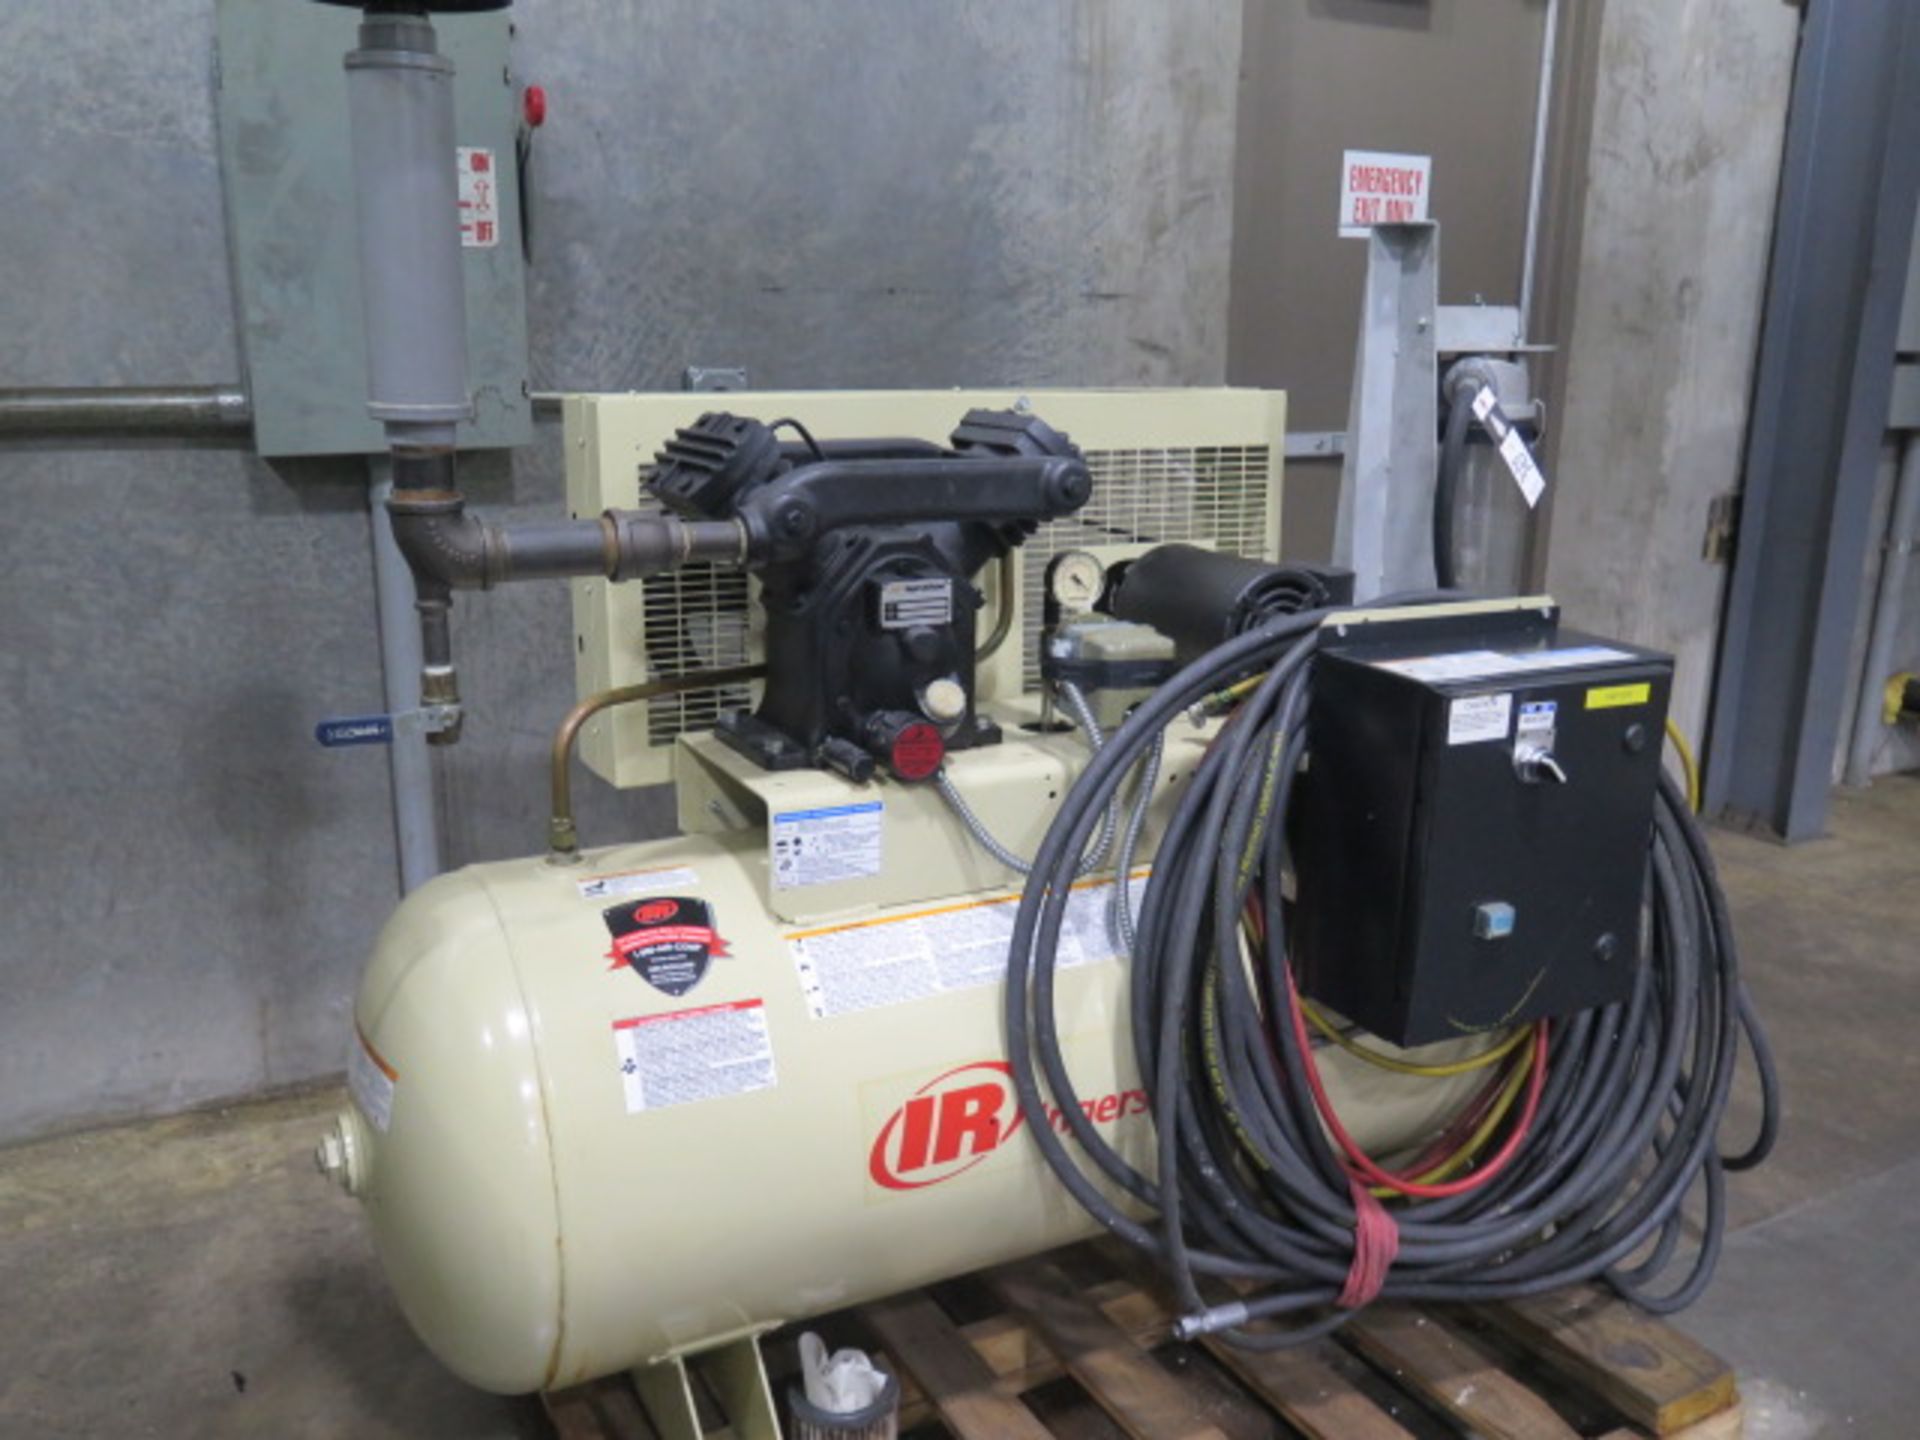 Ingersoll Rand V235D1.5 Vacuum Compressor s/n 0612150226 w/ 1.5Hp Motor, 80 Gallon Tank SOLD AS IS - Image 3 of 8